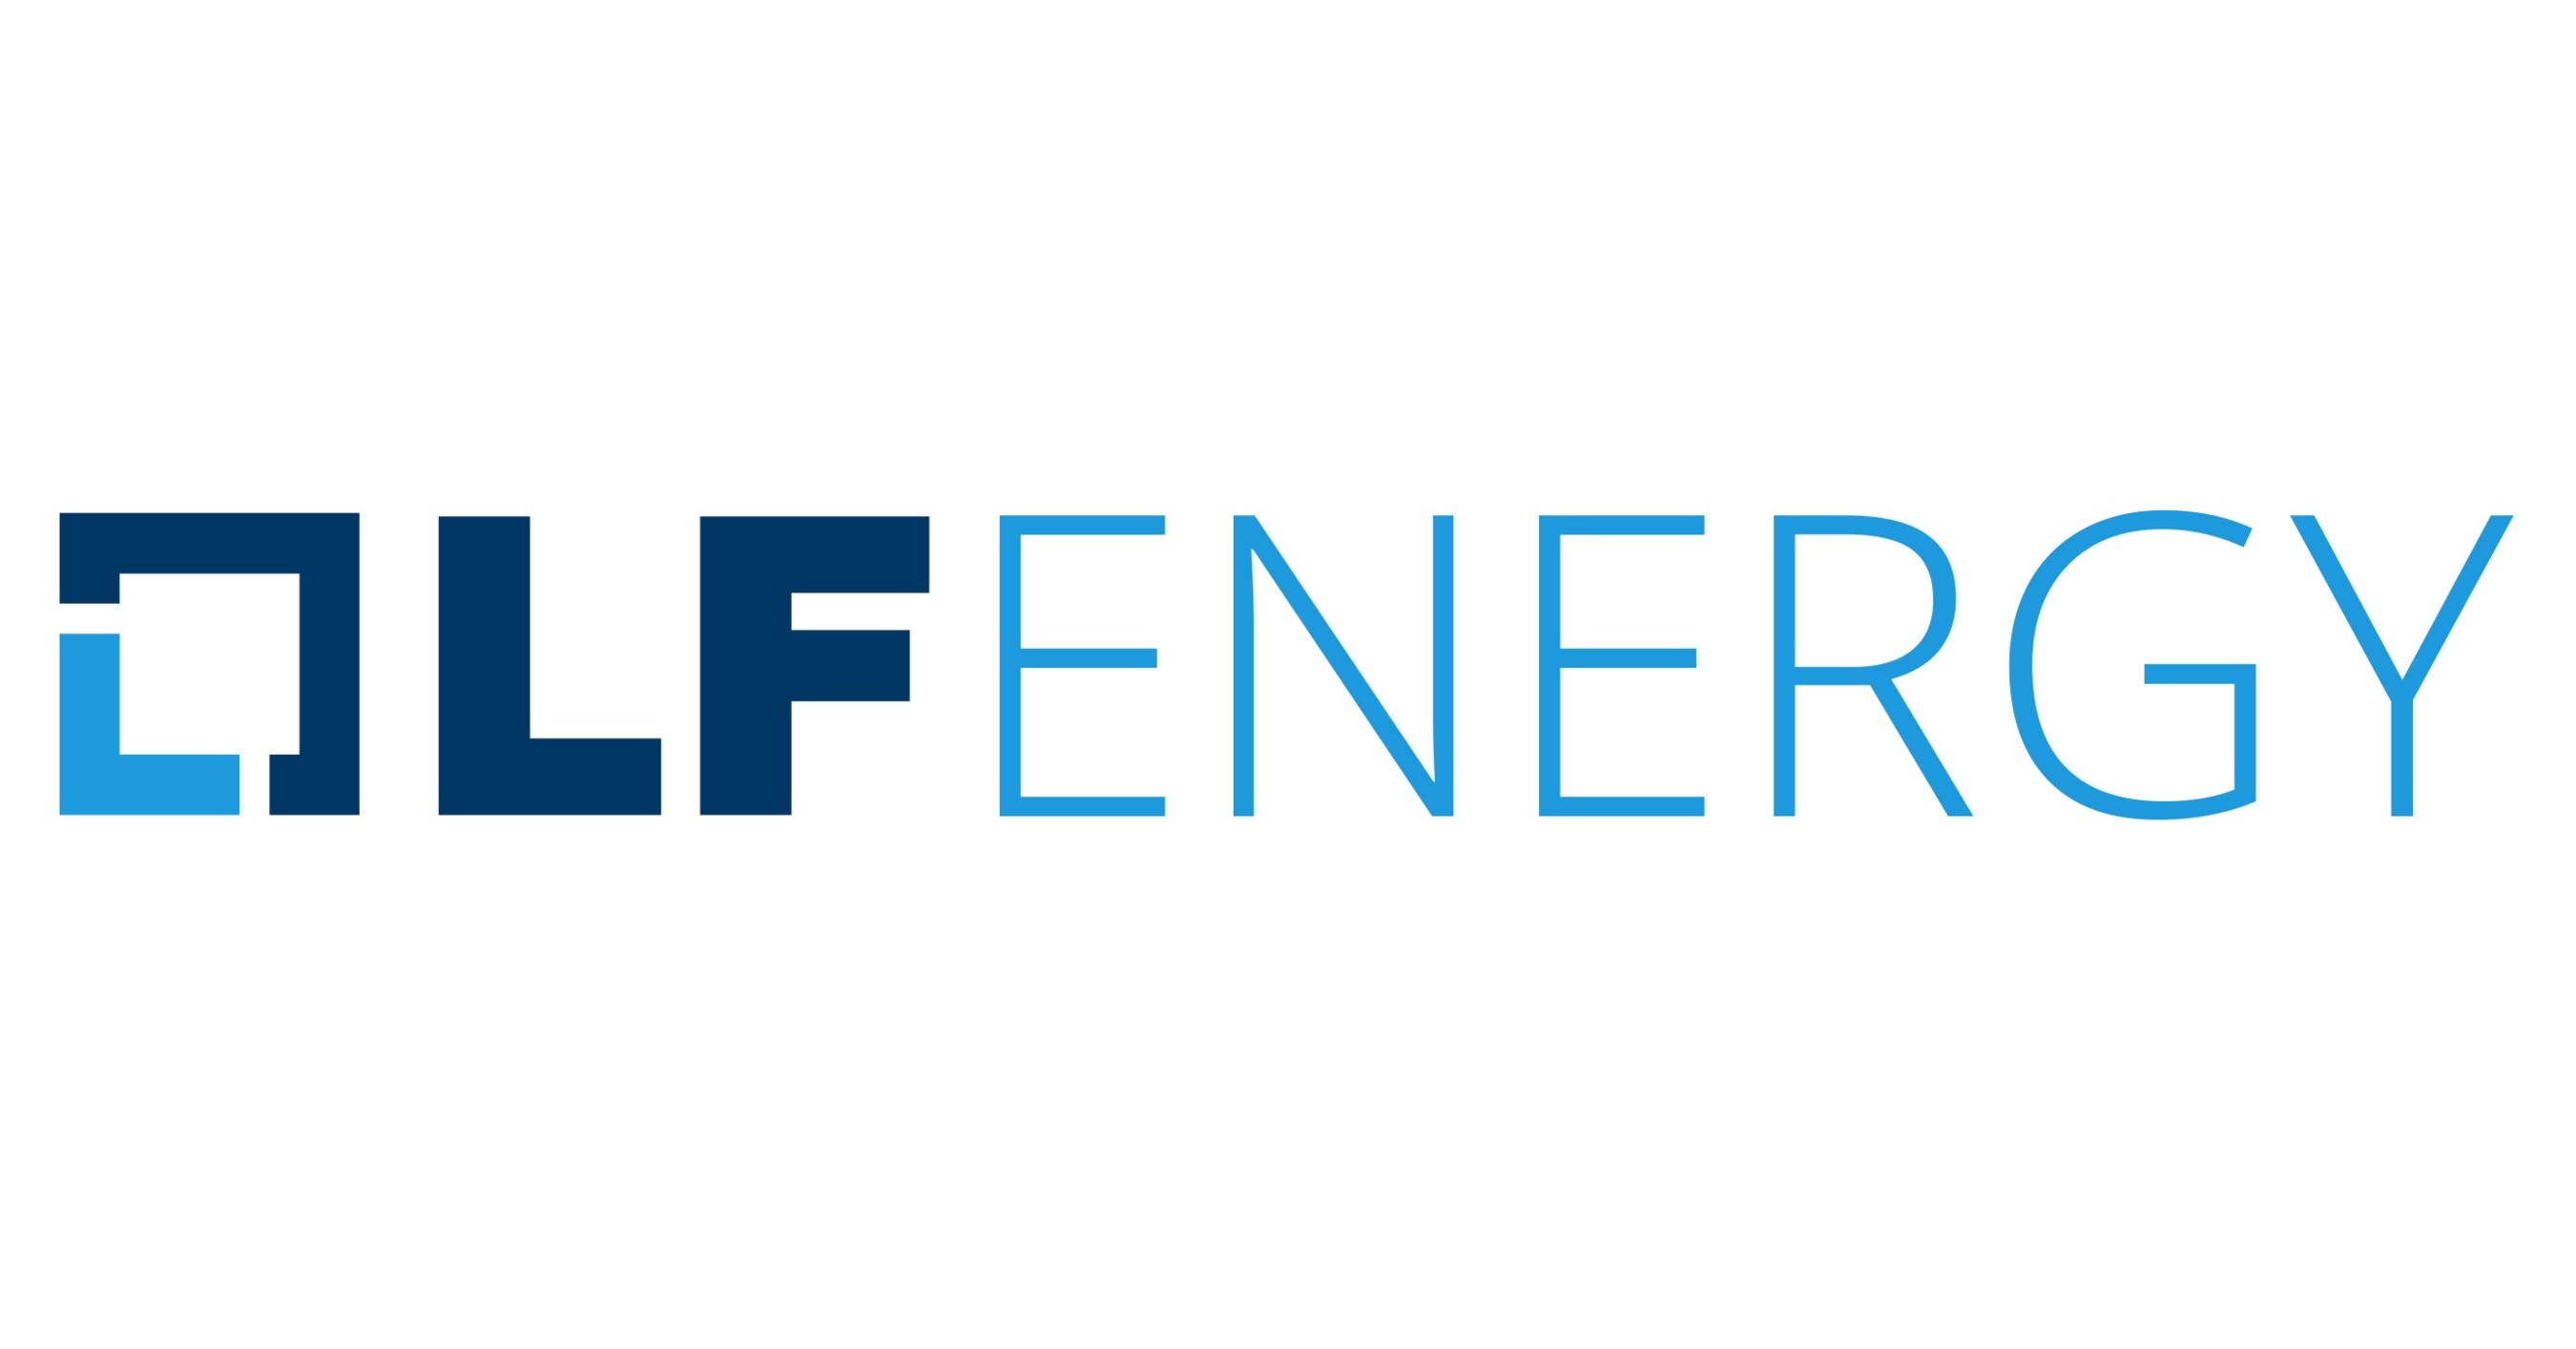 Linux Foundation Energy Gains More Industry Support to Drive the Energy Transition